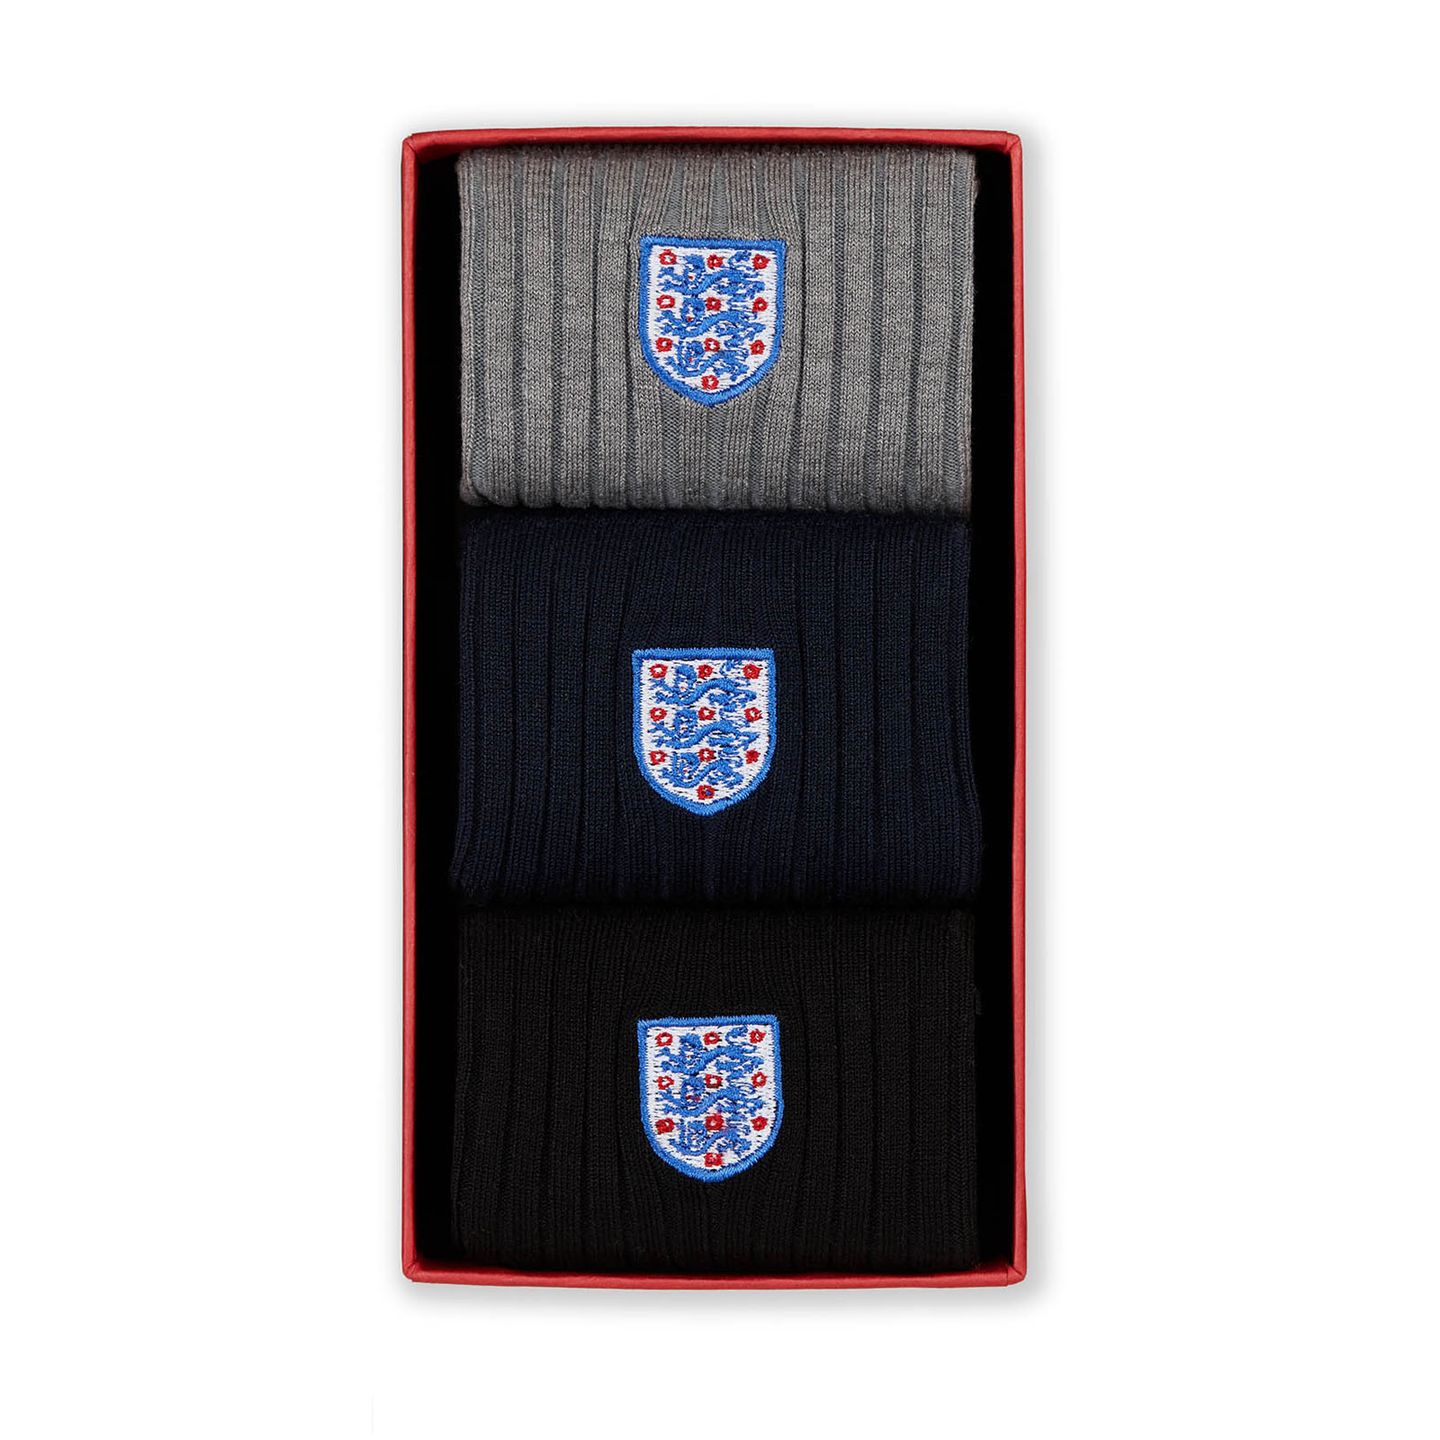 Gaffers Choice for the 3 Lion trio socks in light grey, dark navy and black